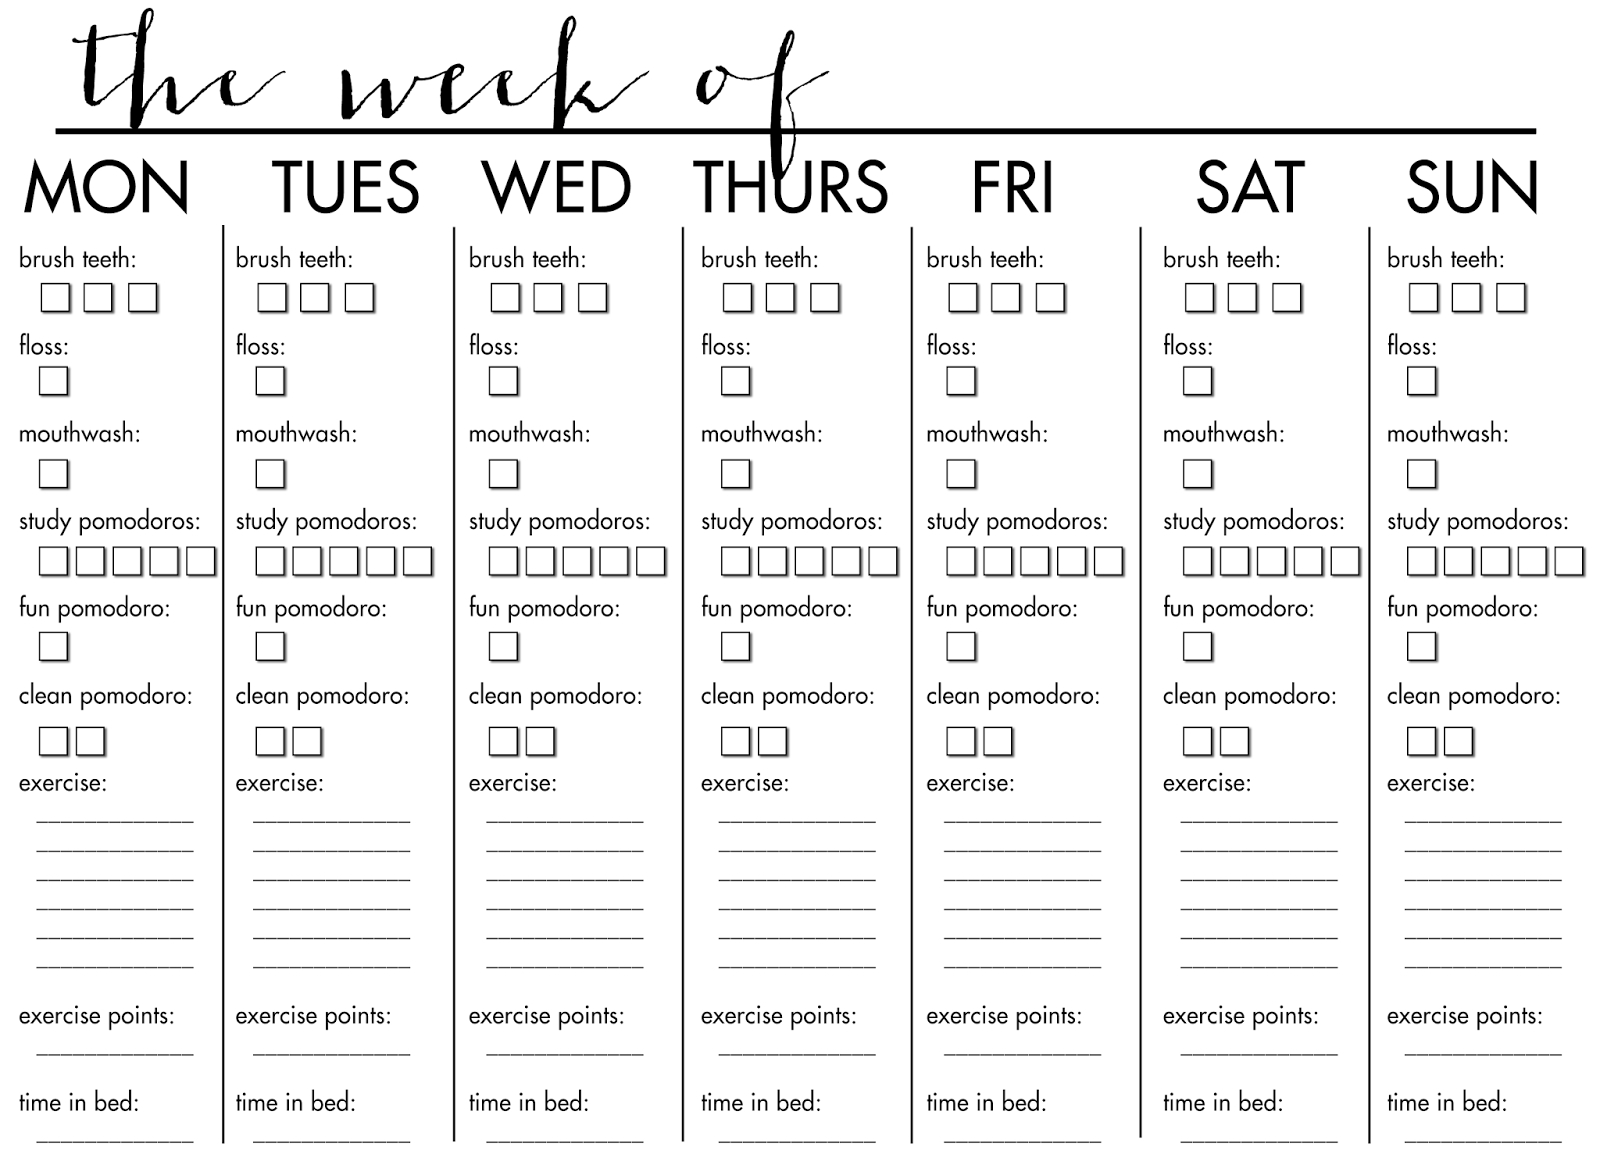 Printable Workout Calendar | Activity Shelter With Regard To Blank Workout Schedule Template